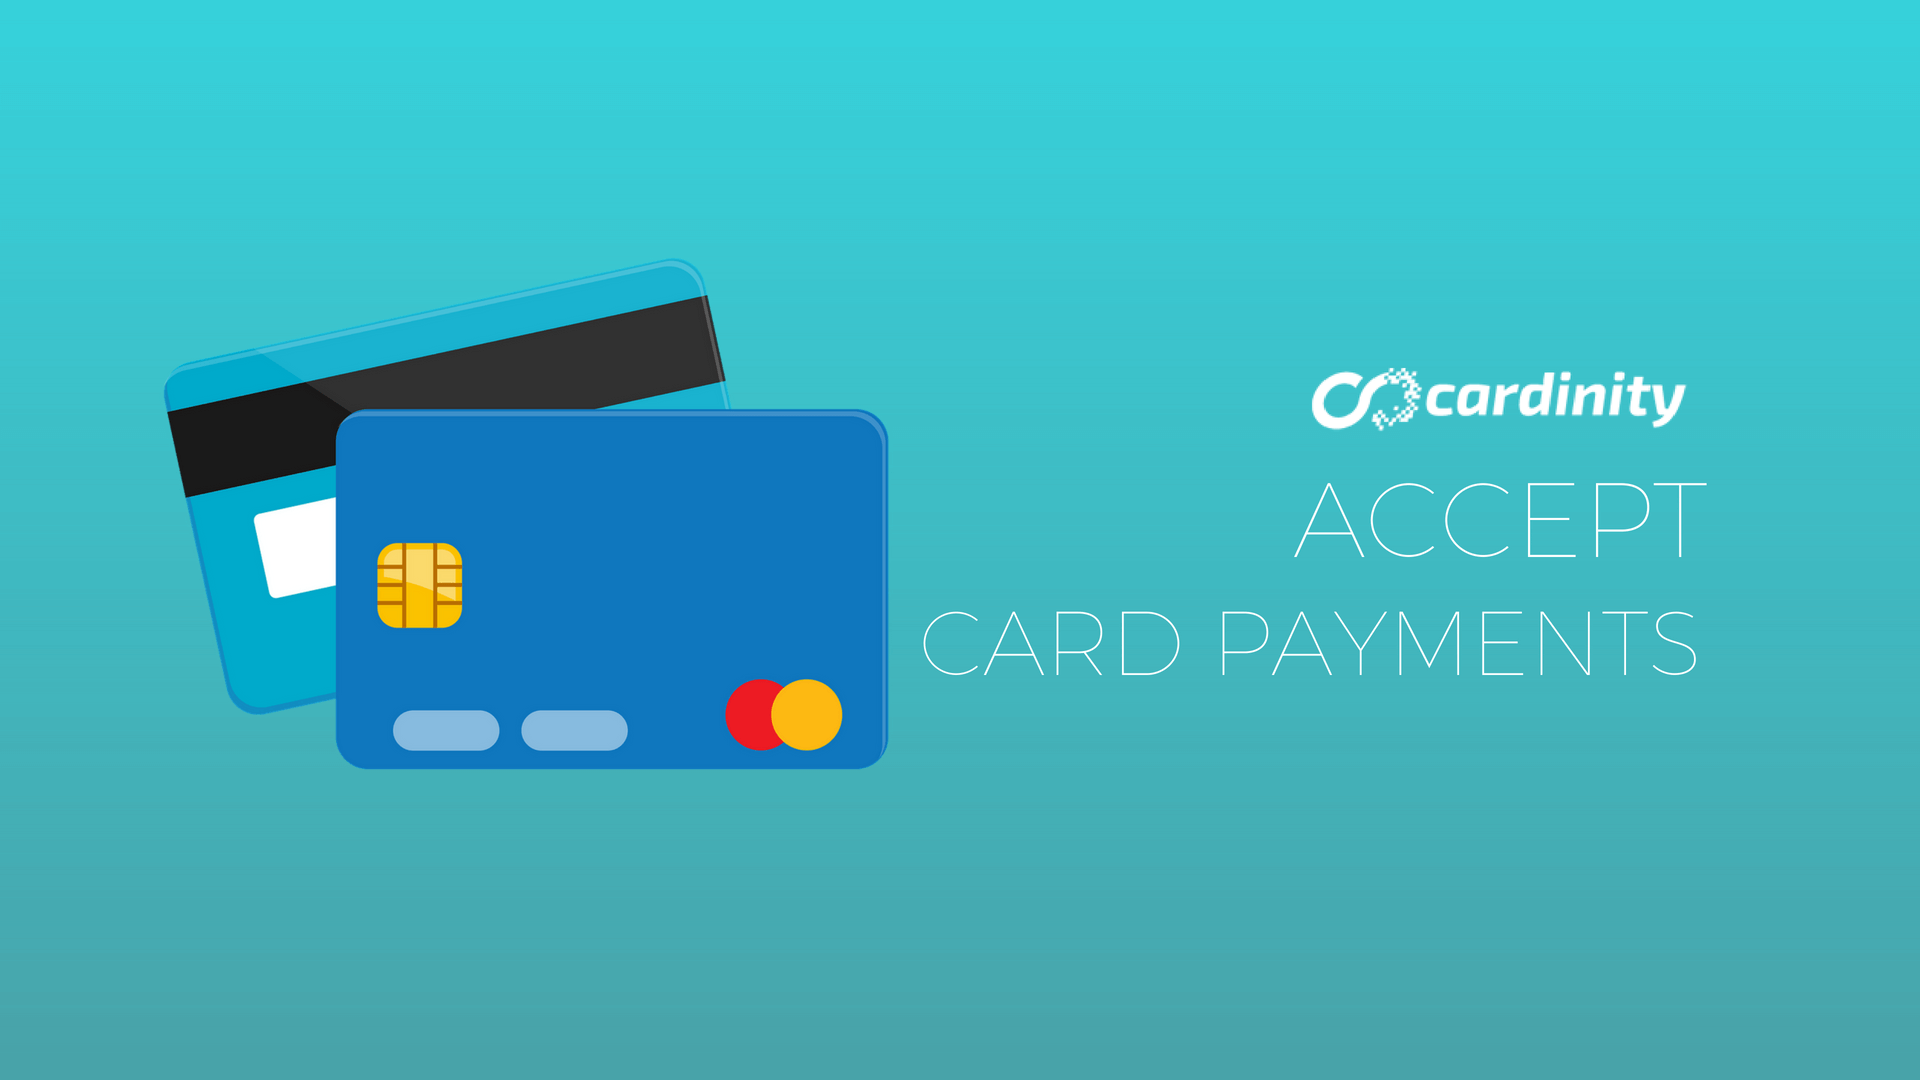 Card payments for e-commerce websites